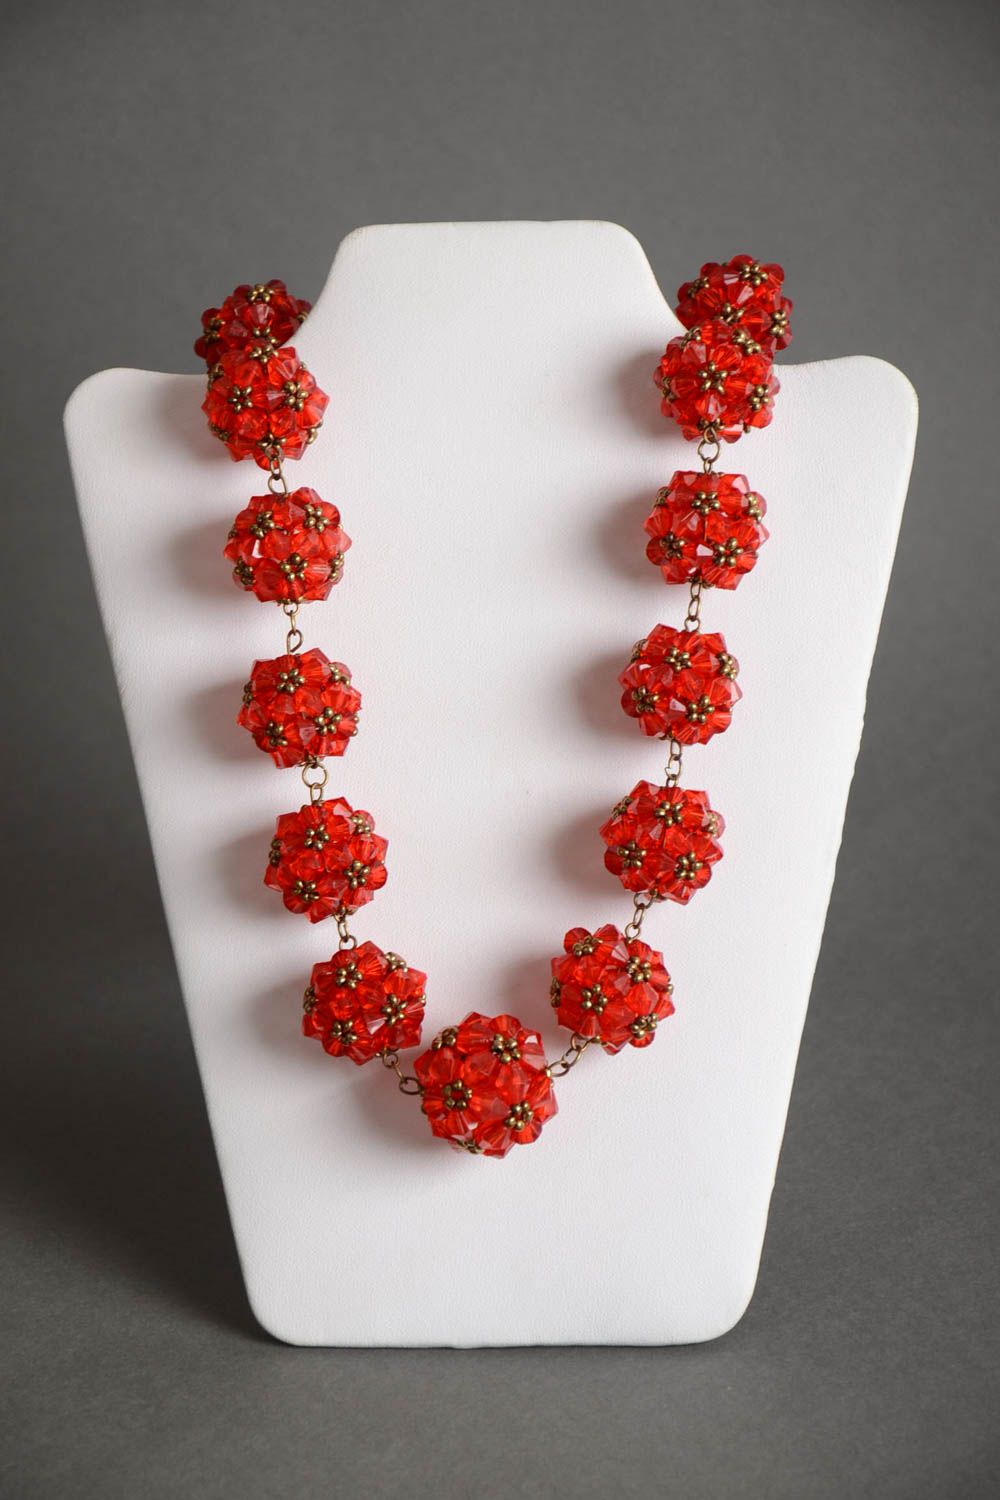 Handmade designer crocheted beaded necklace in bright red color palette photo 2